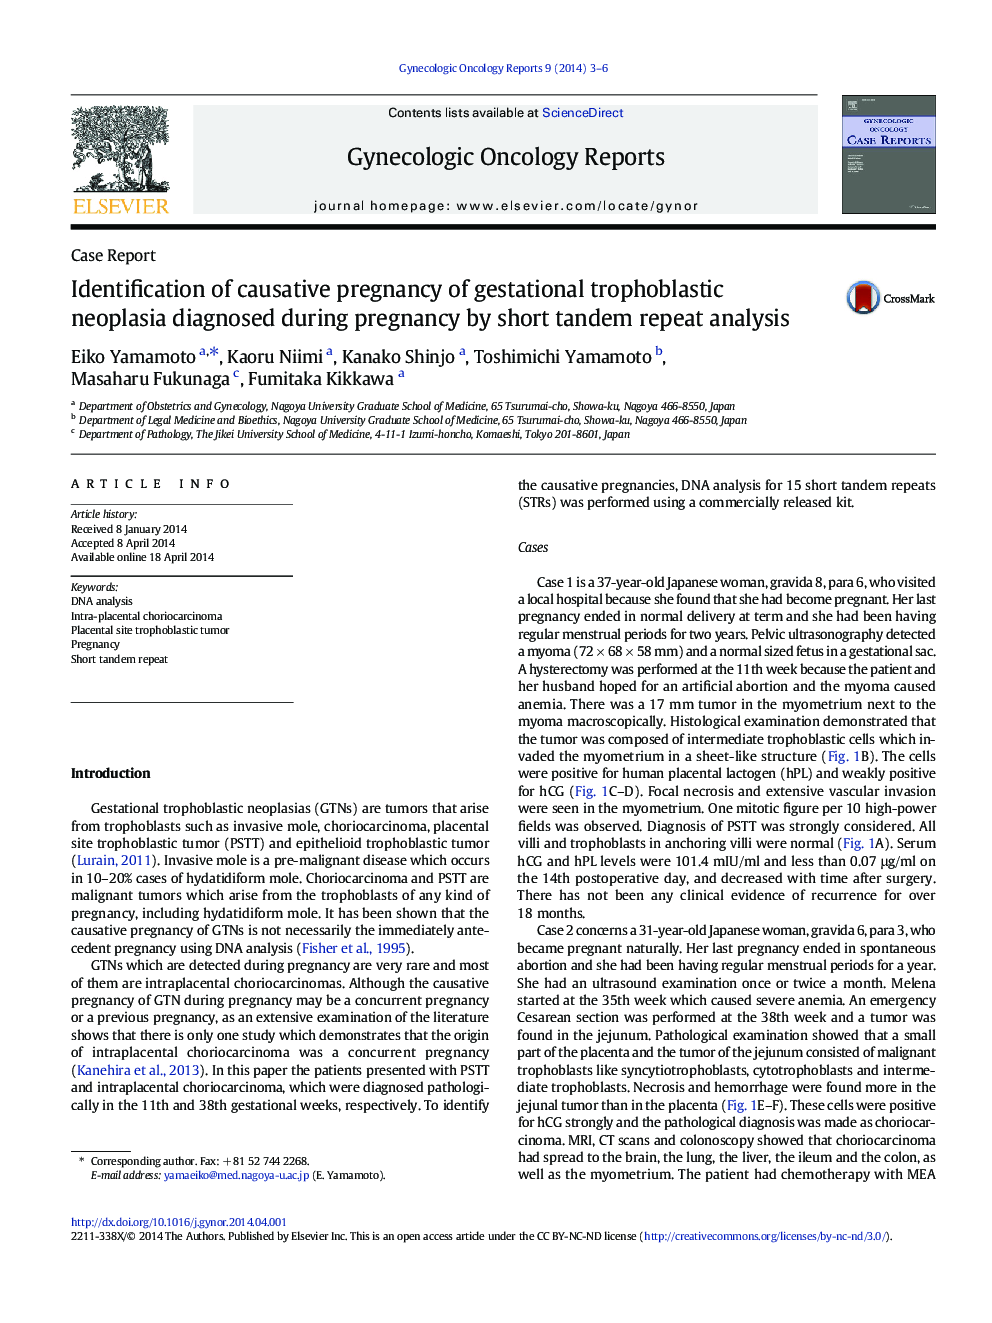 Identification of causative pregnancy of gestational trophoblastic neoplasia diagnosed during pregnancy by short tandem repeat analysis